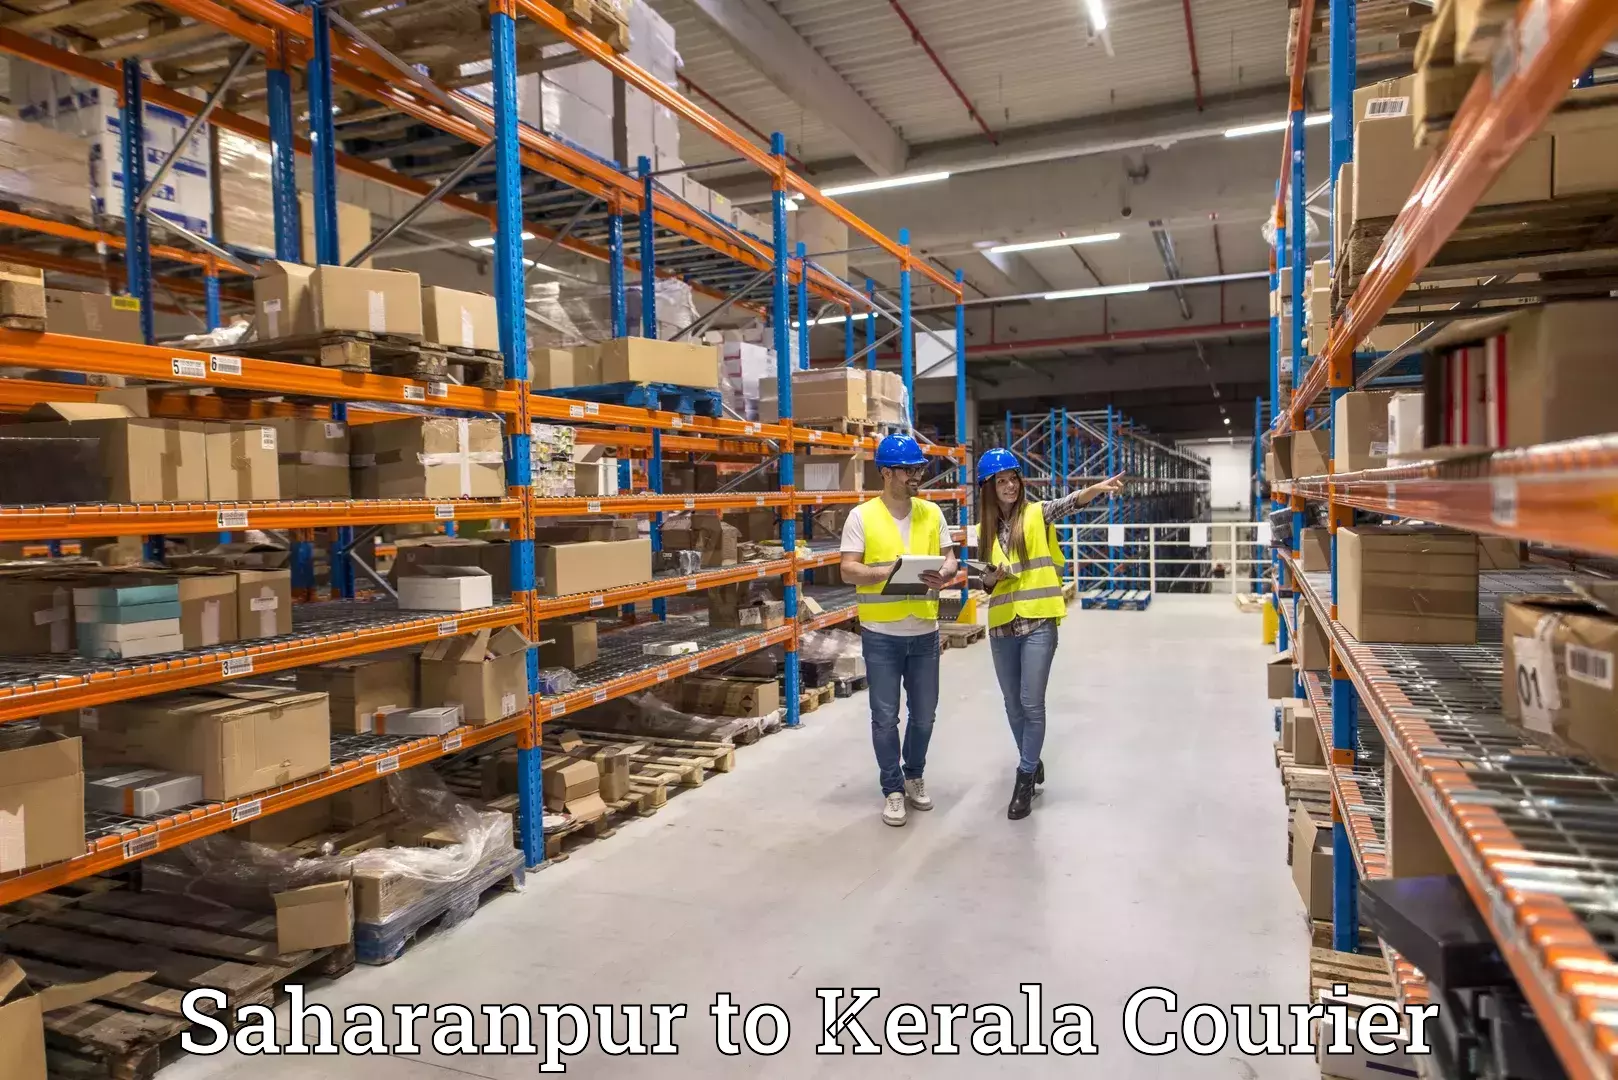 Affordable parcel service Saharanpur to Cochin Port Kochi